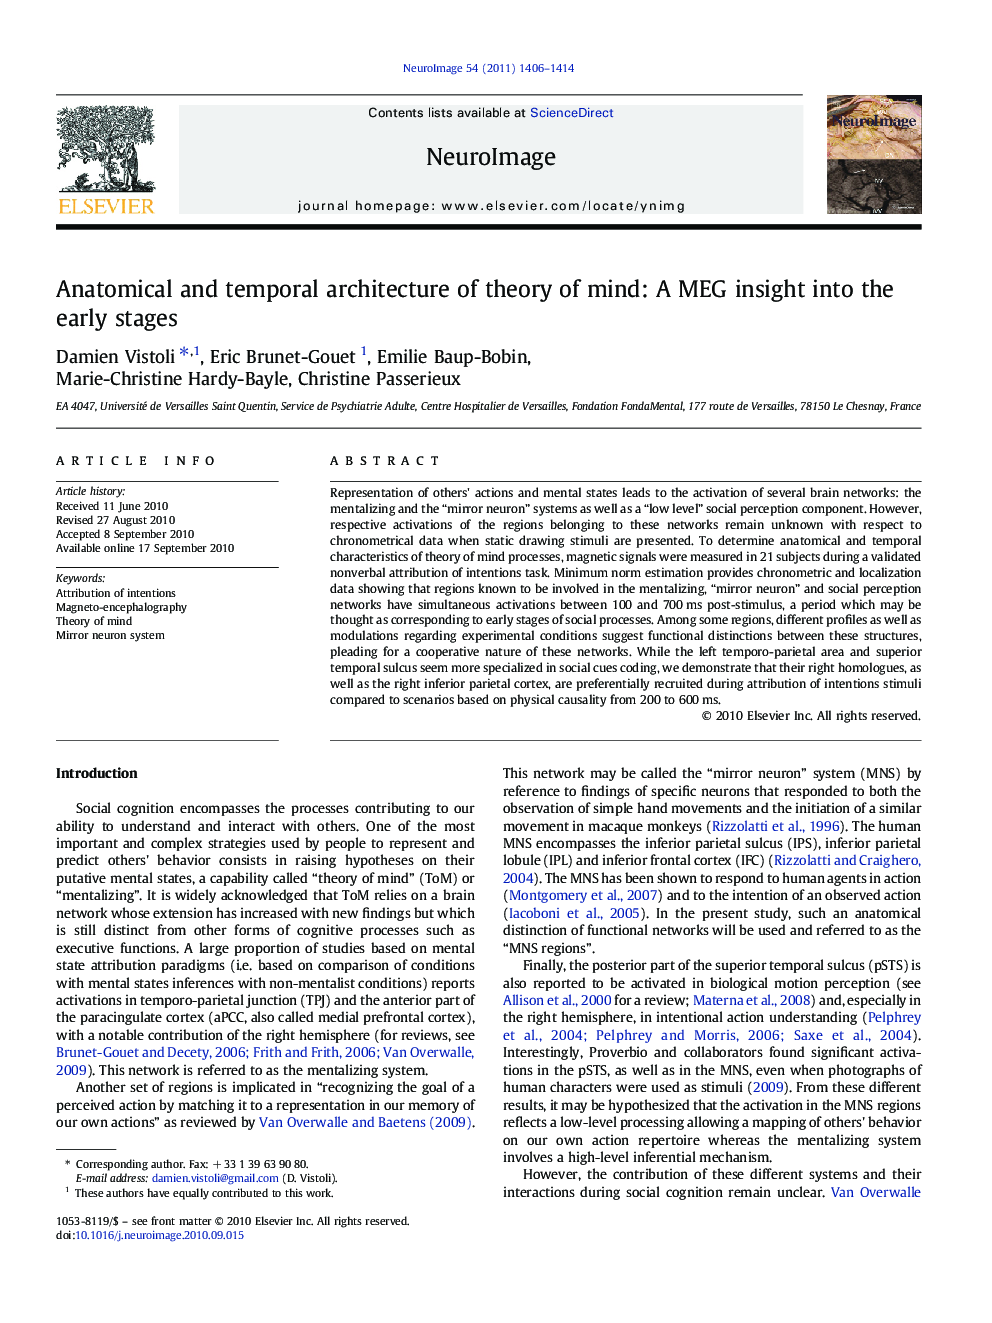 Anatomical and temporal architecture of theory of mind: A MEG insight into the early stages